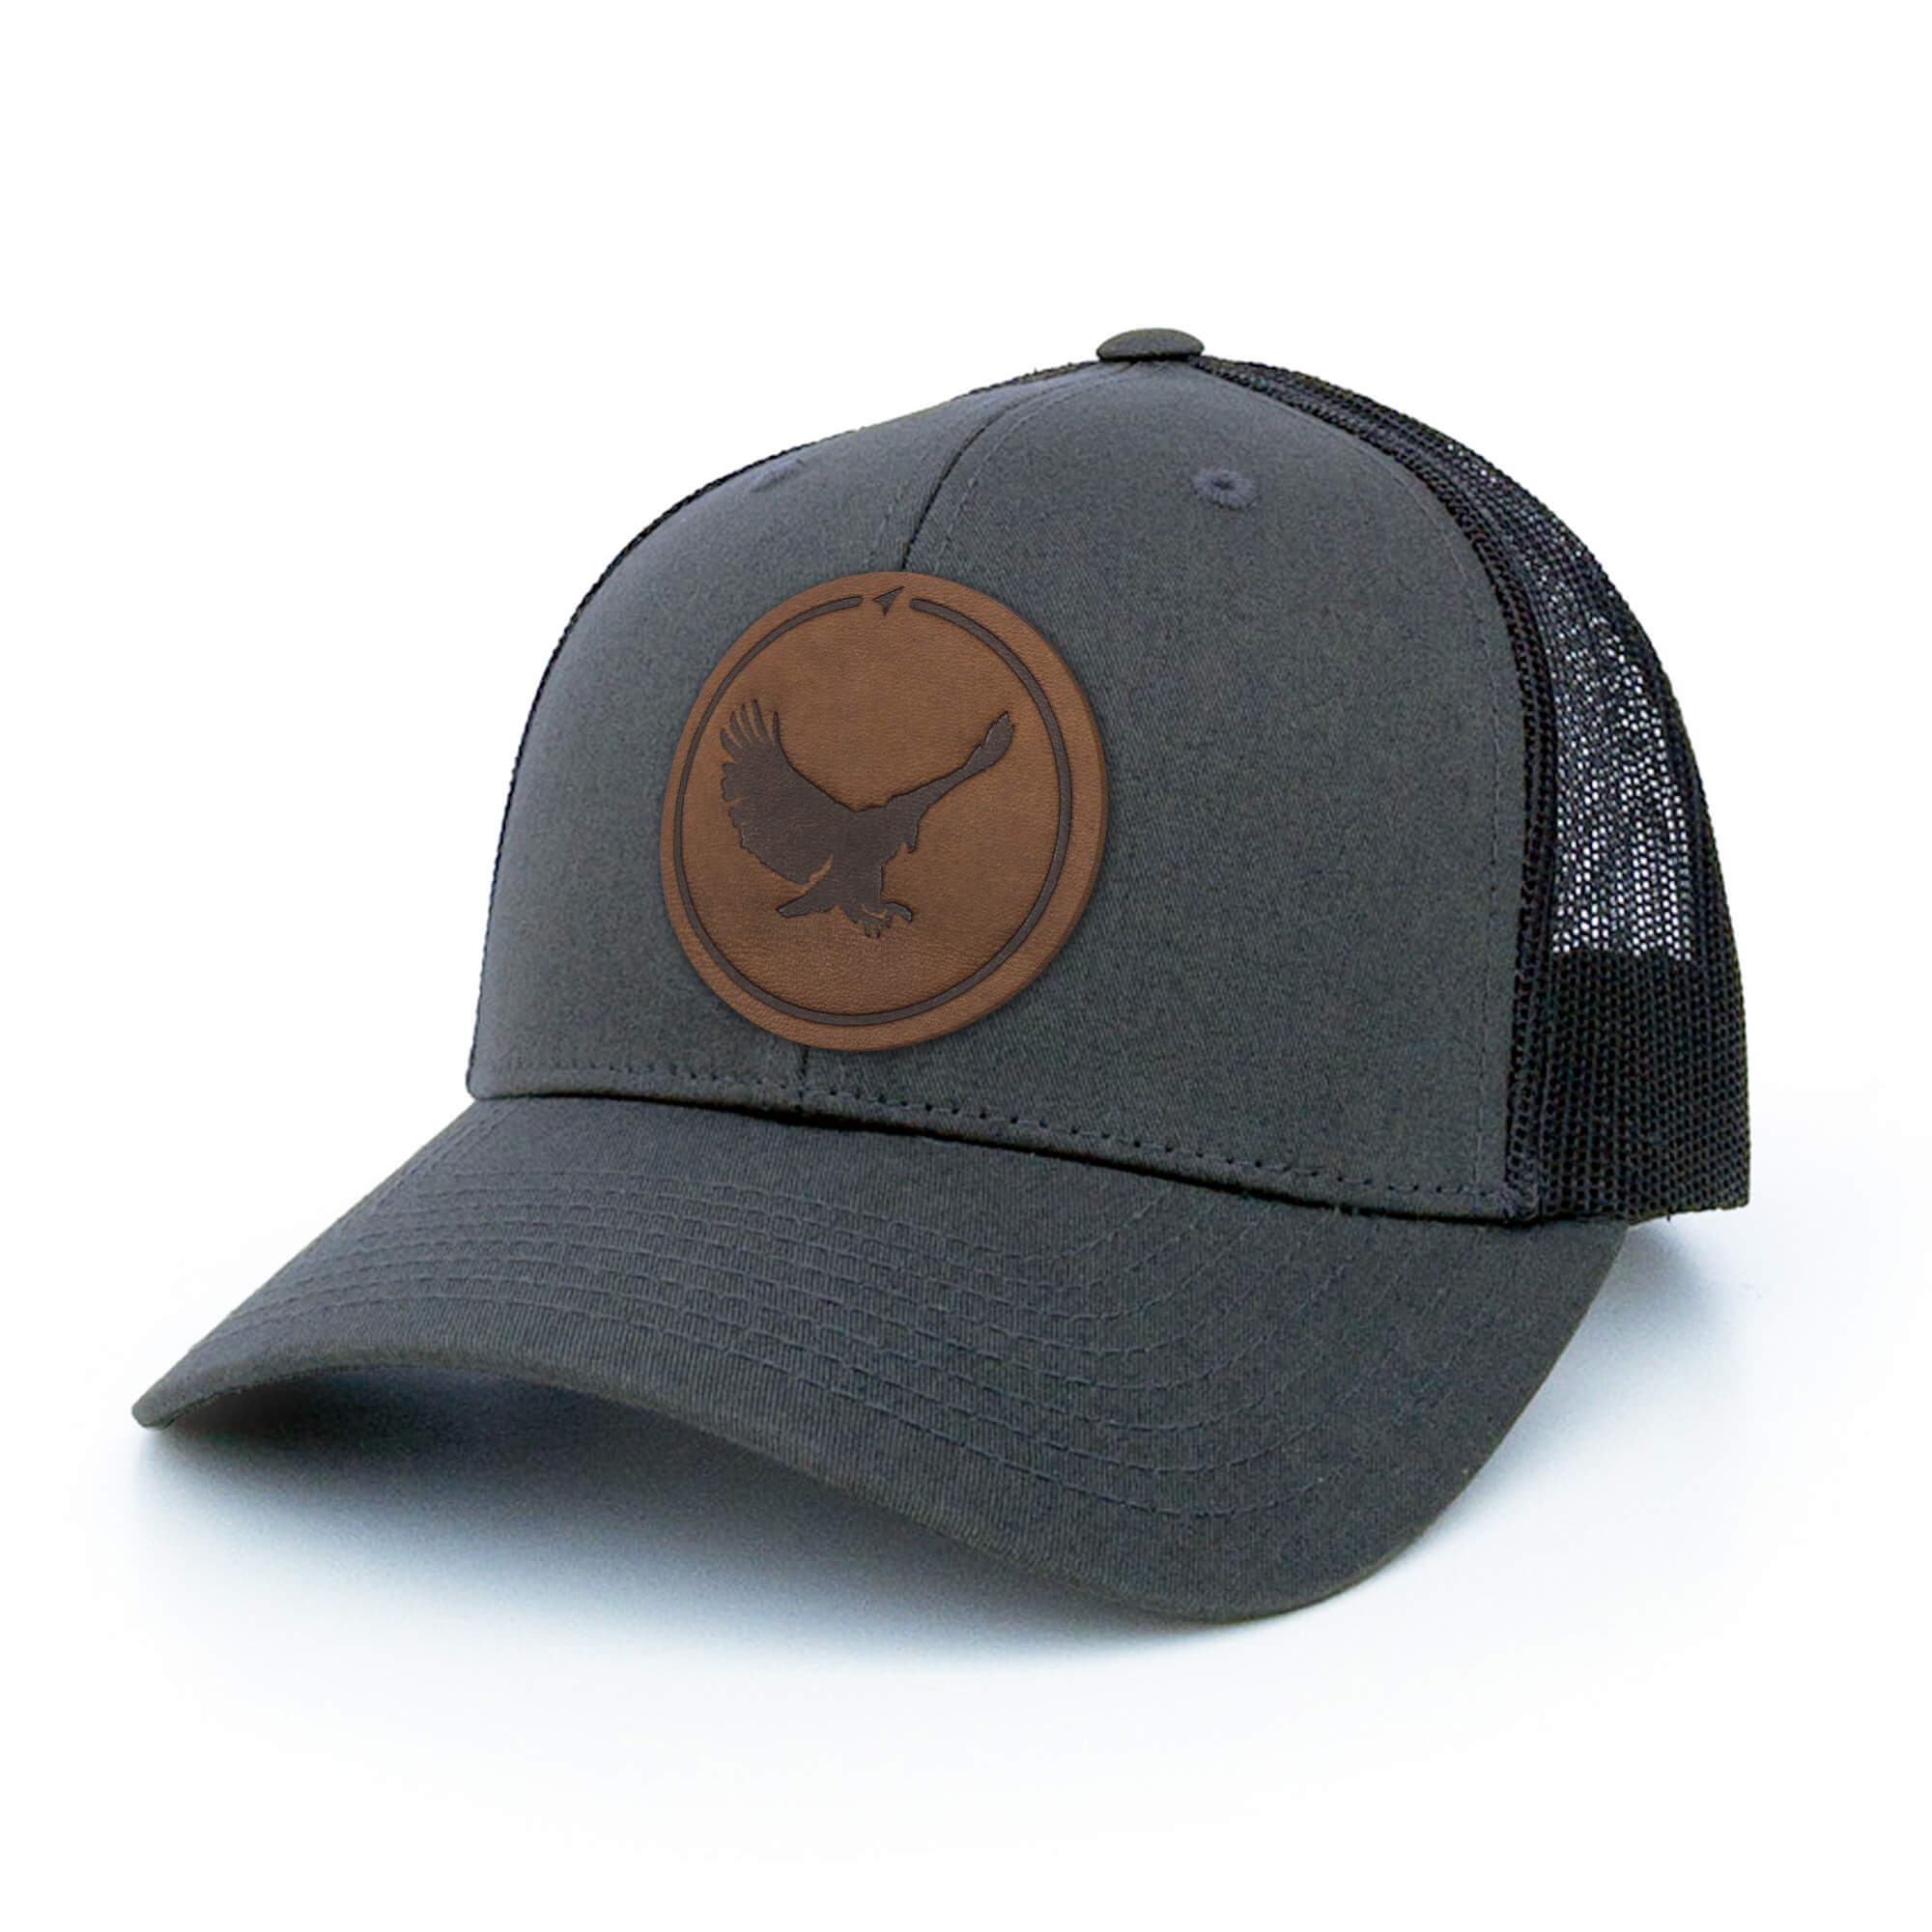 Charcoal trucker hat with full-grain leather patch of an Eagle | BLACK-004-004, CHARC-004-004, NAVY-004-004, HGREY-004-004, MOSS-004-004, BROWN-004-004